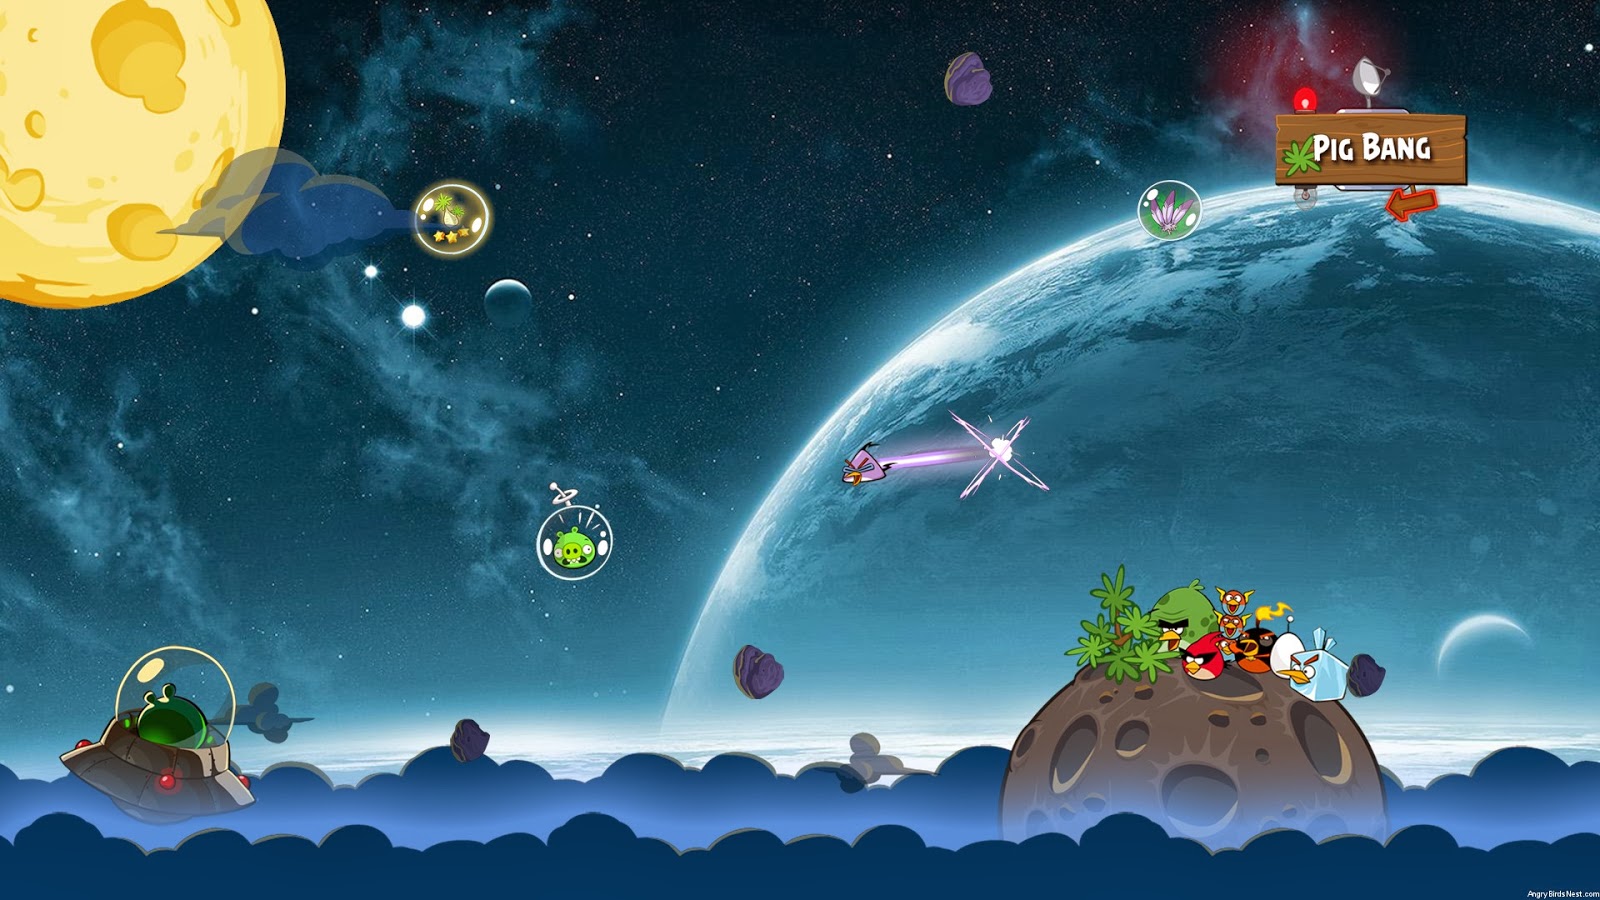 Angry birds space 1.4 4 2016 crack patch file free download